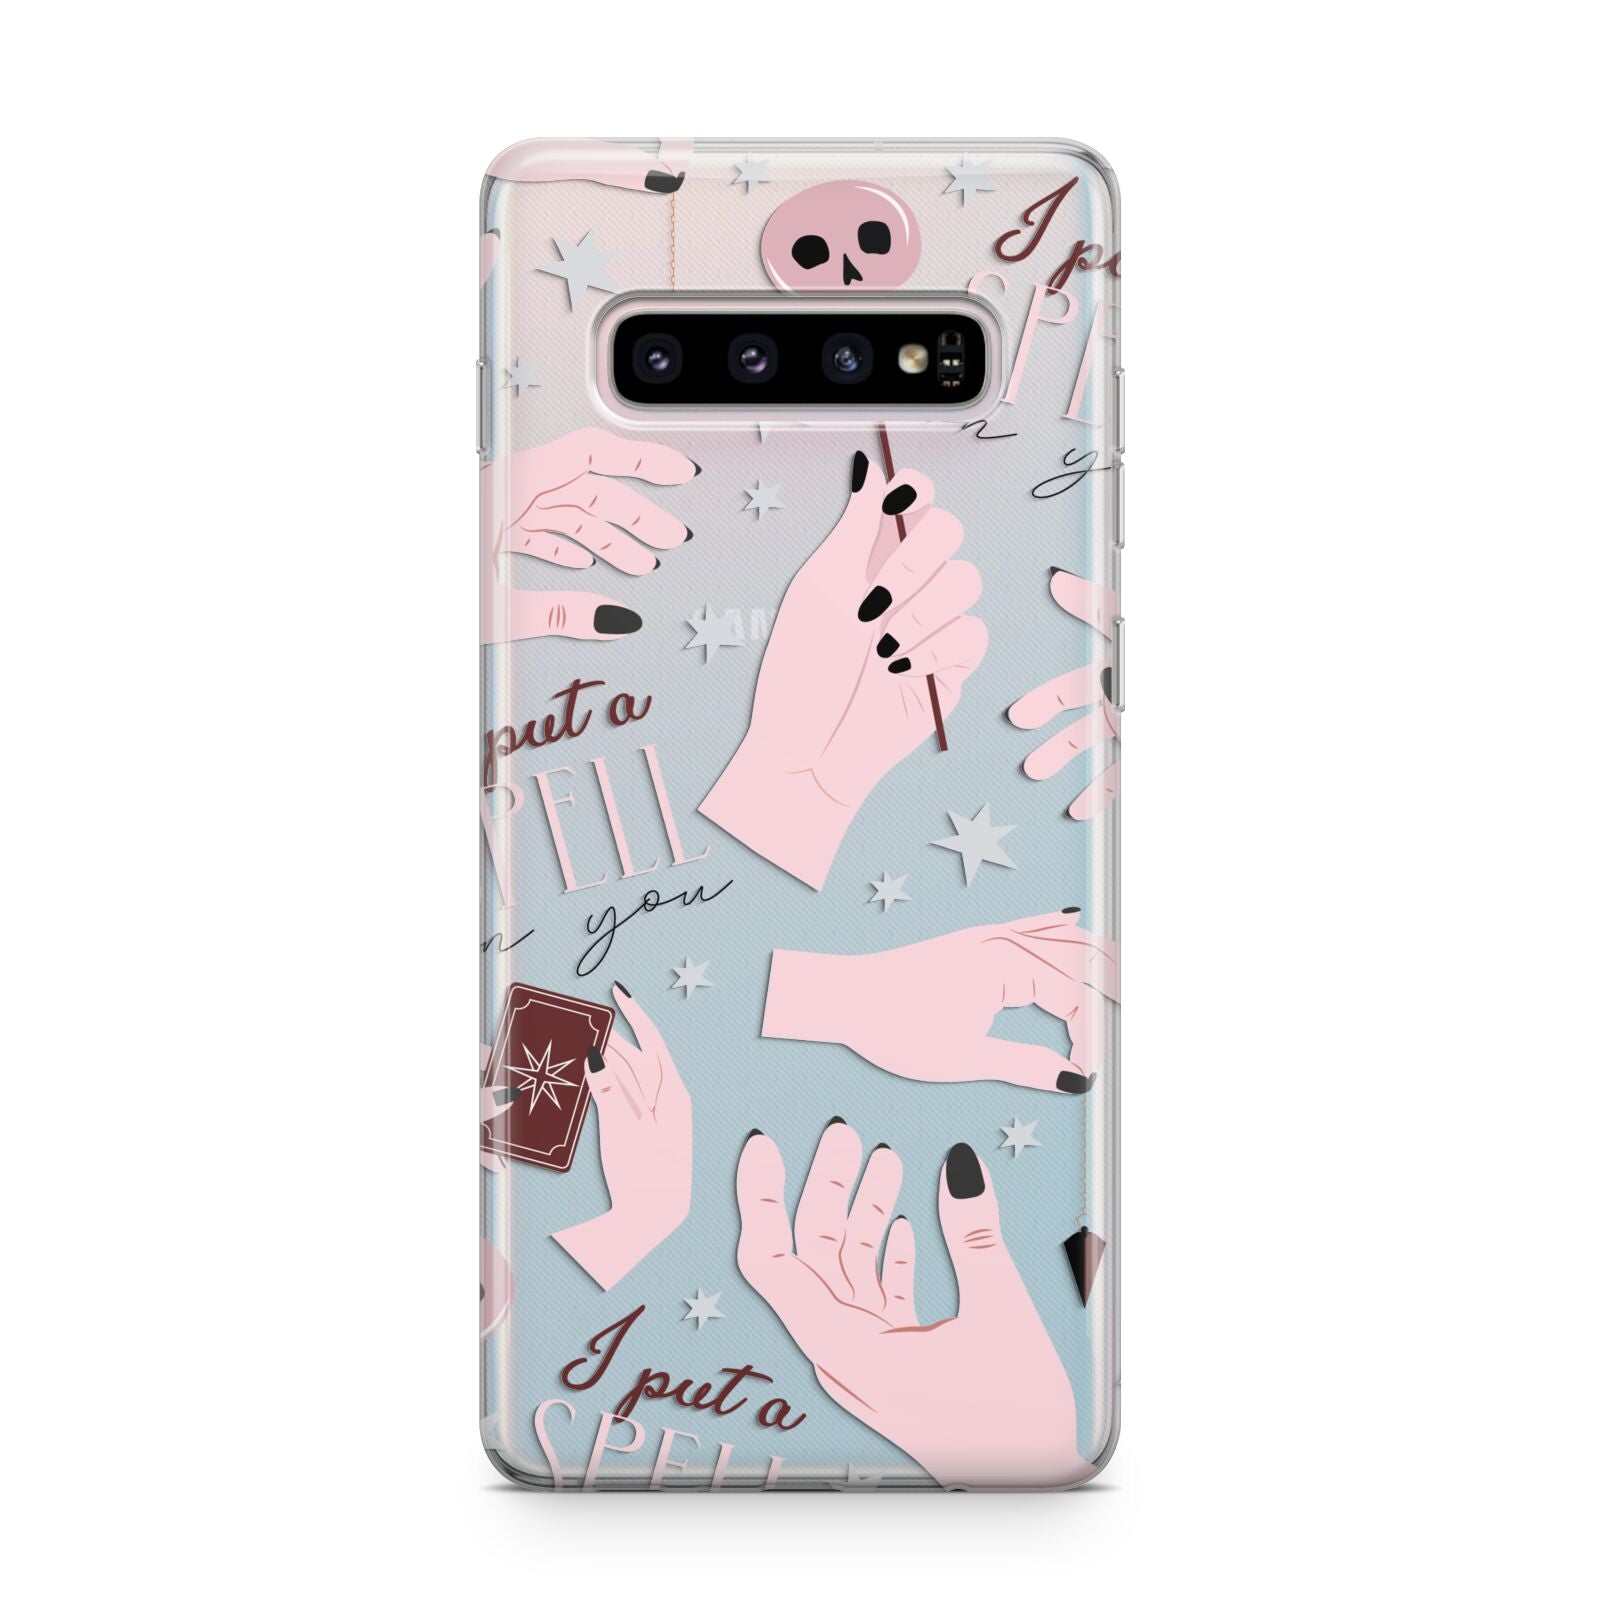 Witches Hands and Tarot Cards Samsung Galaxy S10 Plus Case